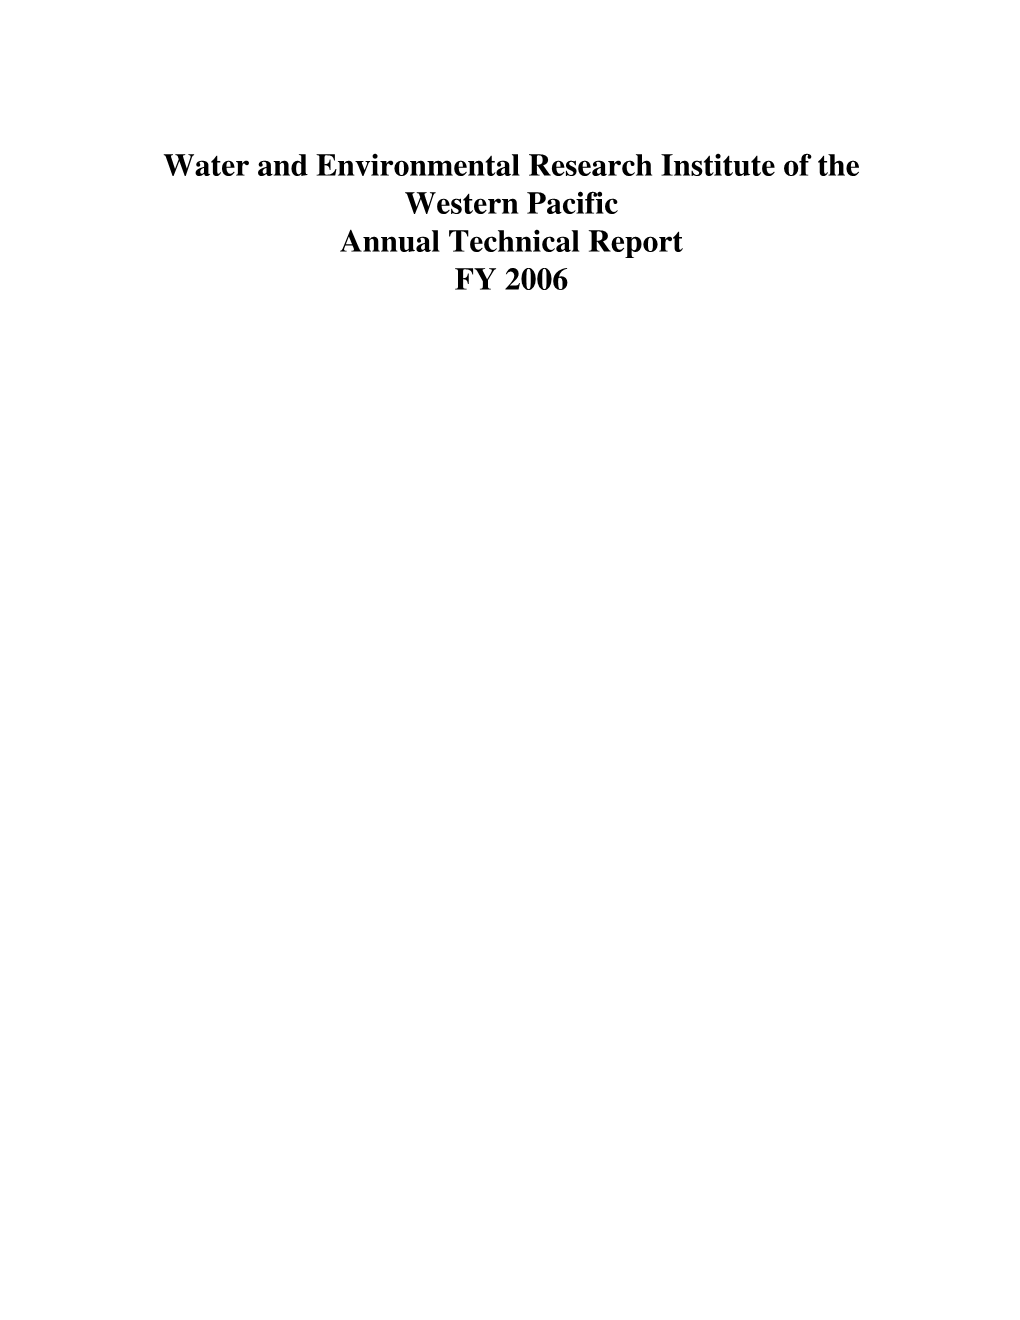 Water and Environmental Research Institute of the Western Pacific Annual Technical Report FY 2006